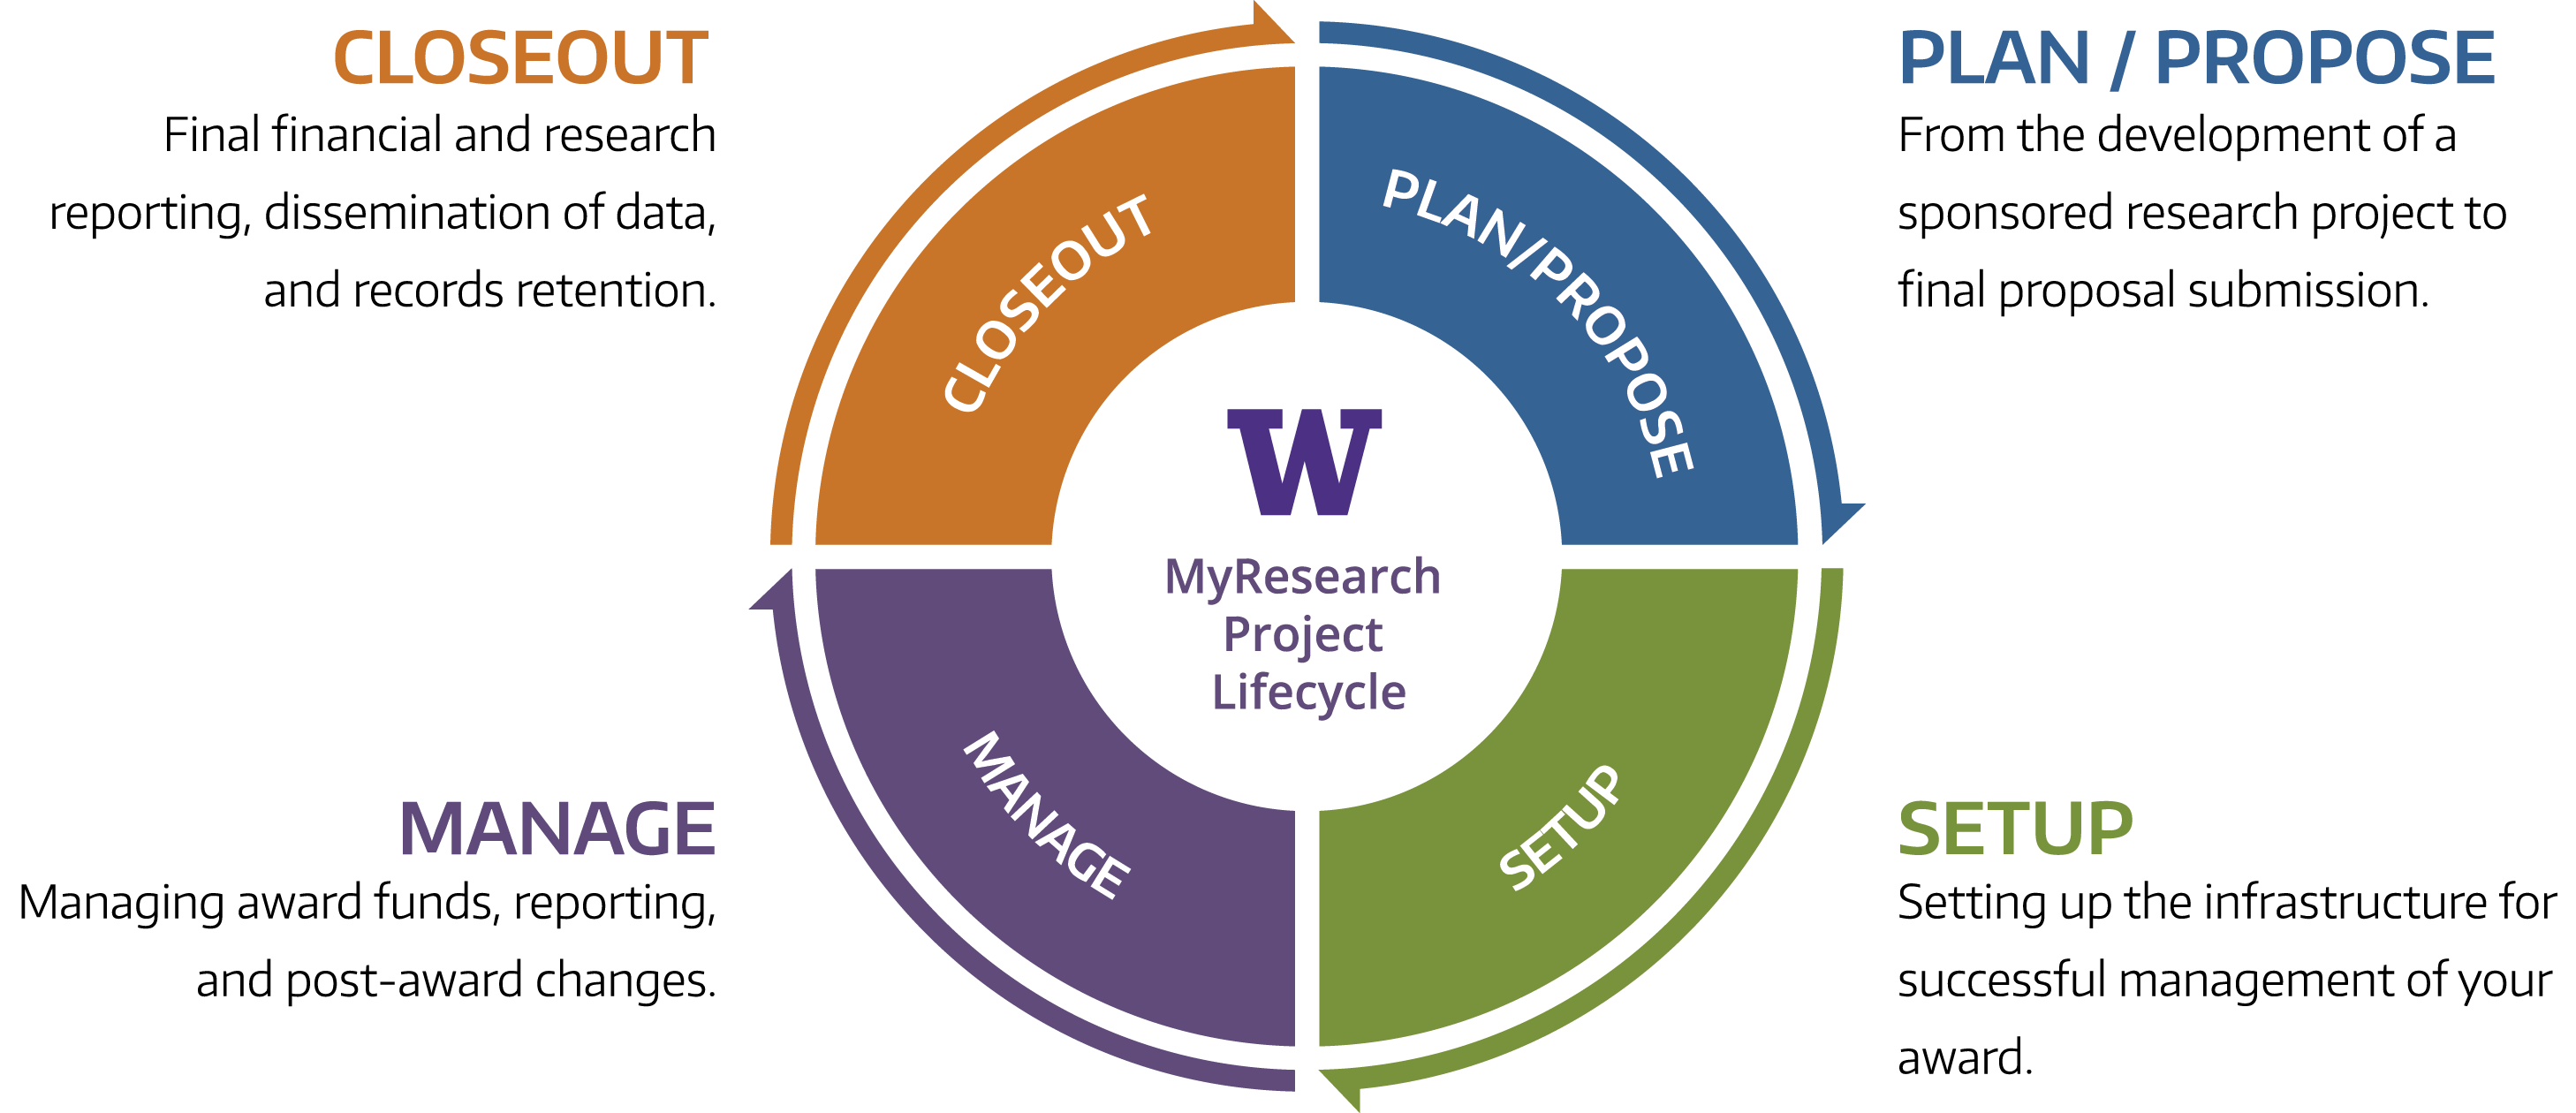 The UW MyResearch Lifecycle with the four stages: Plan/Propose, Setup, Manage, and Closeout